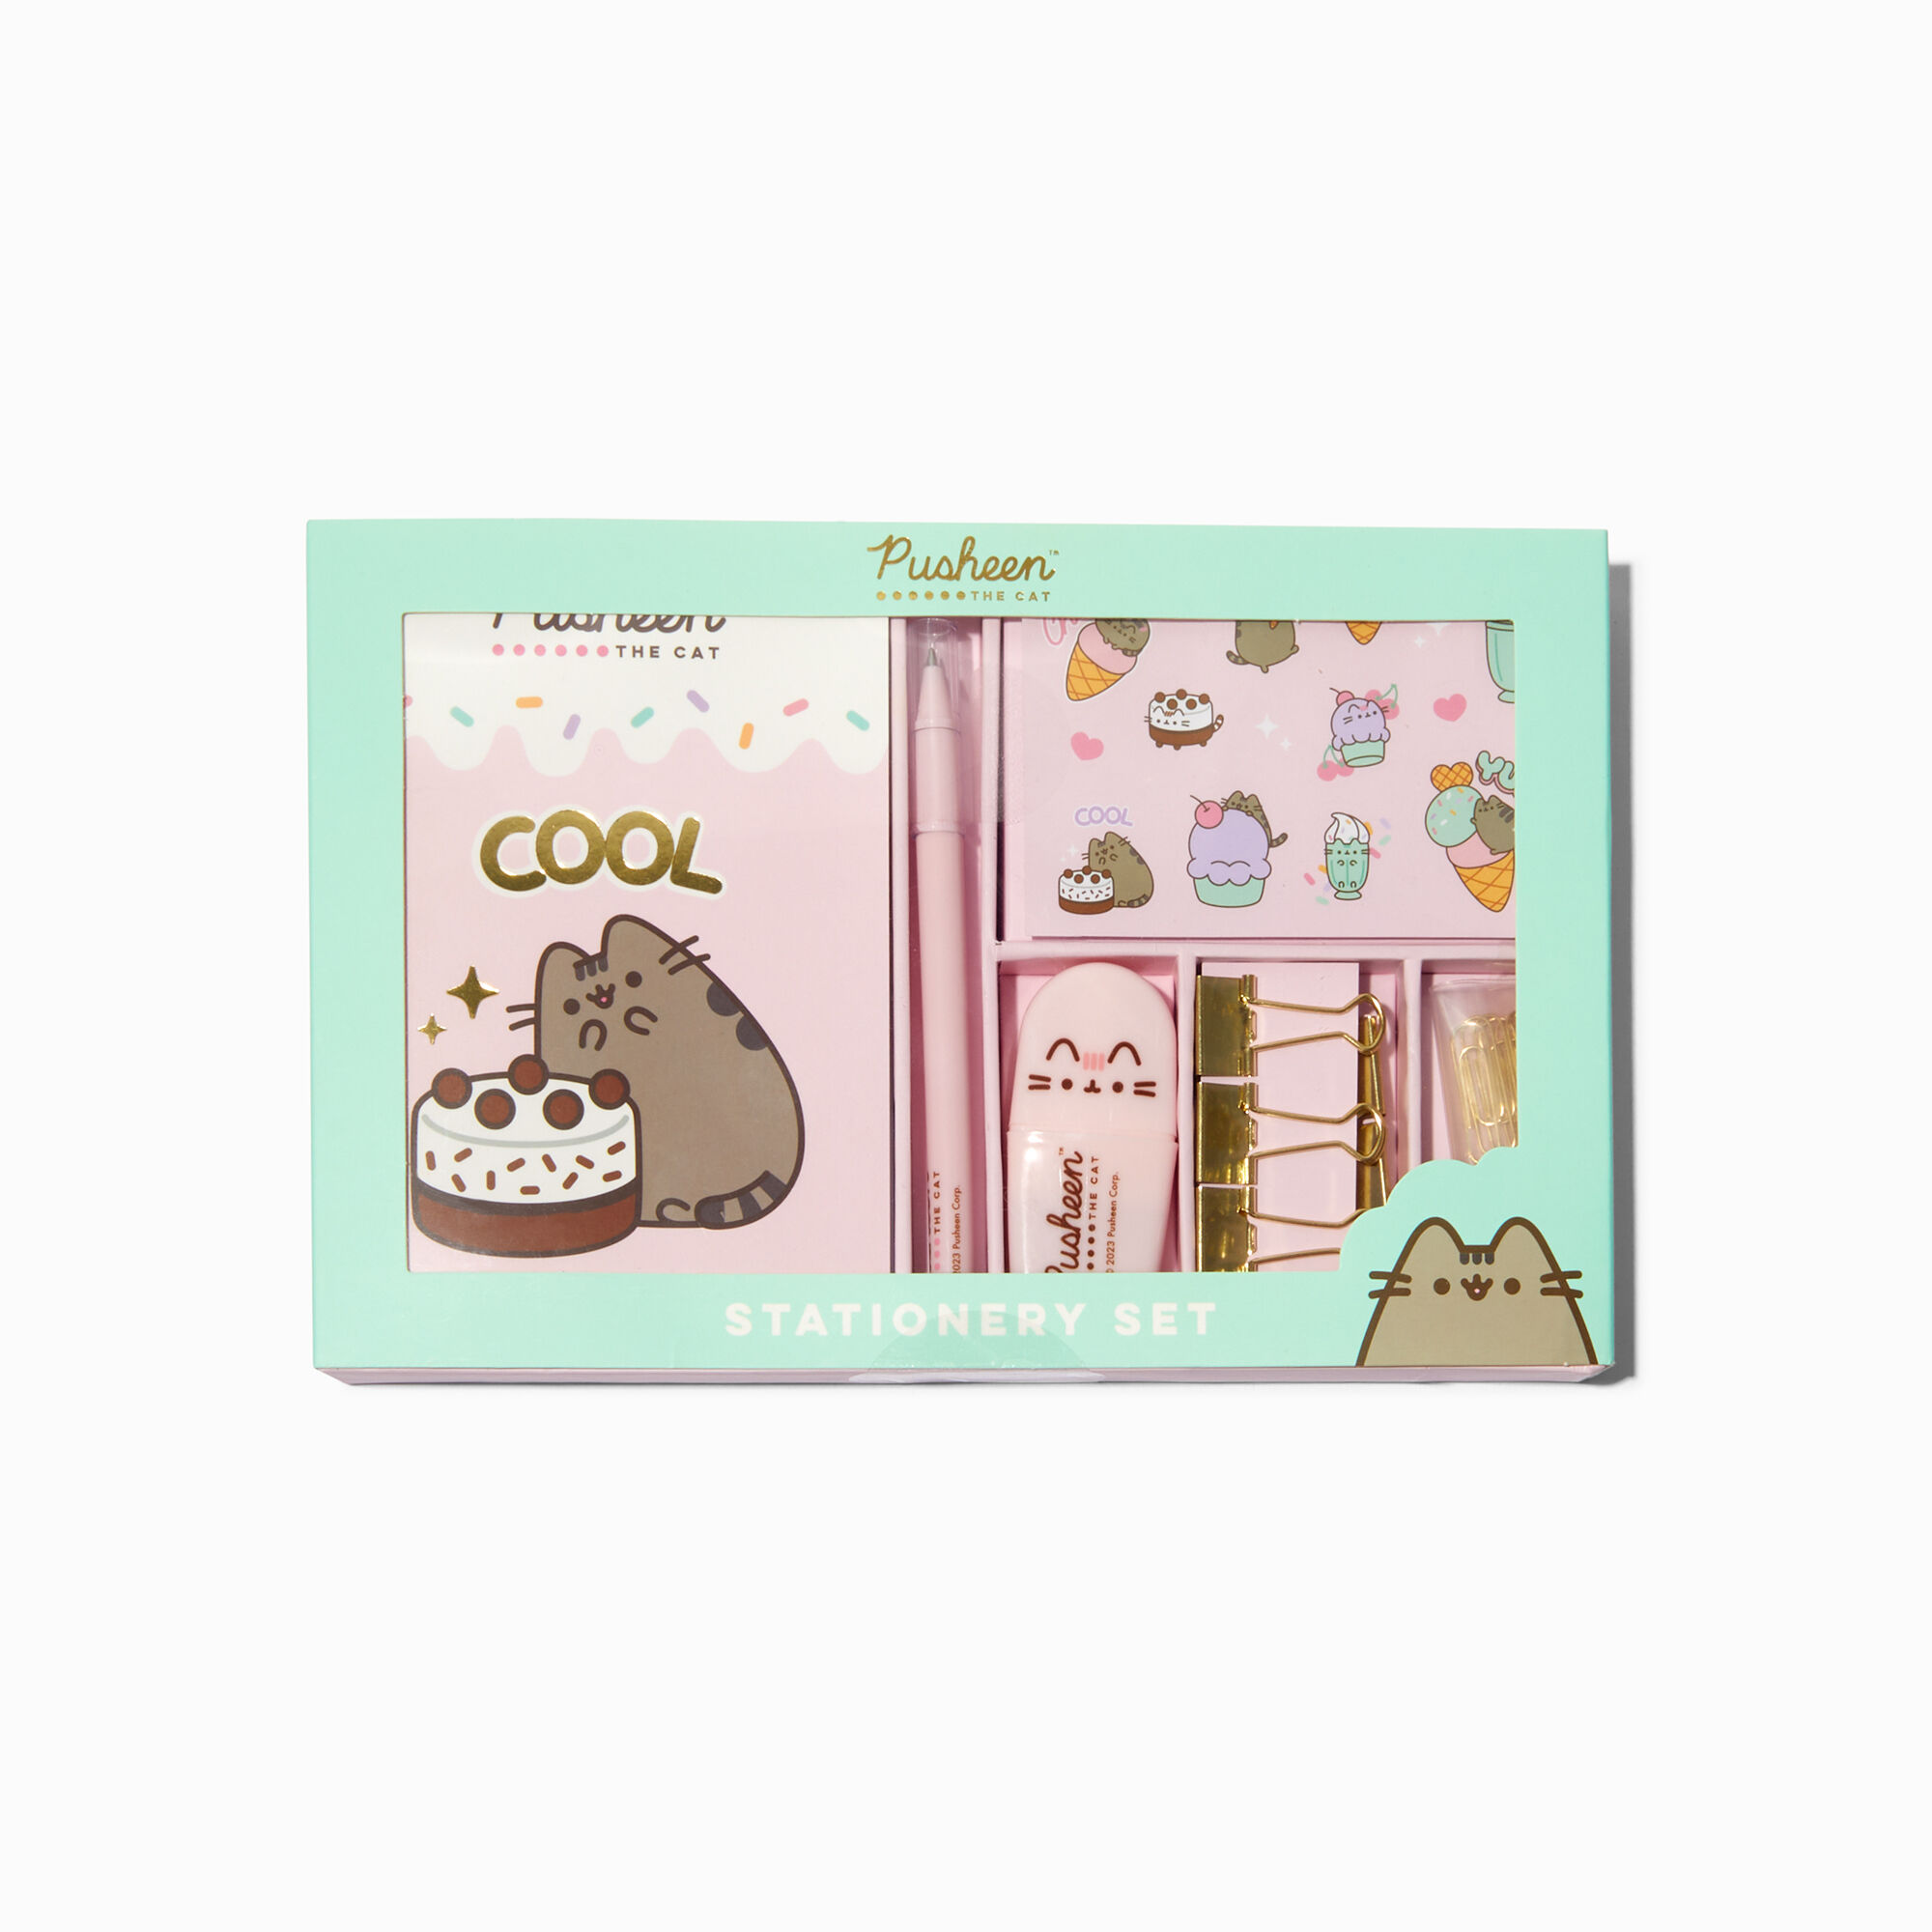 View Claires Pusheen Premium Stationery Set information